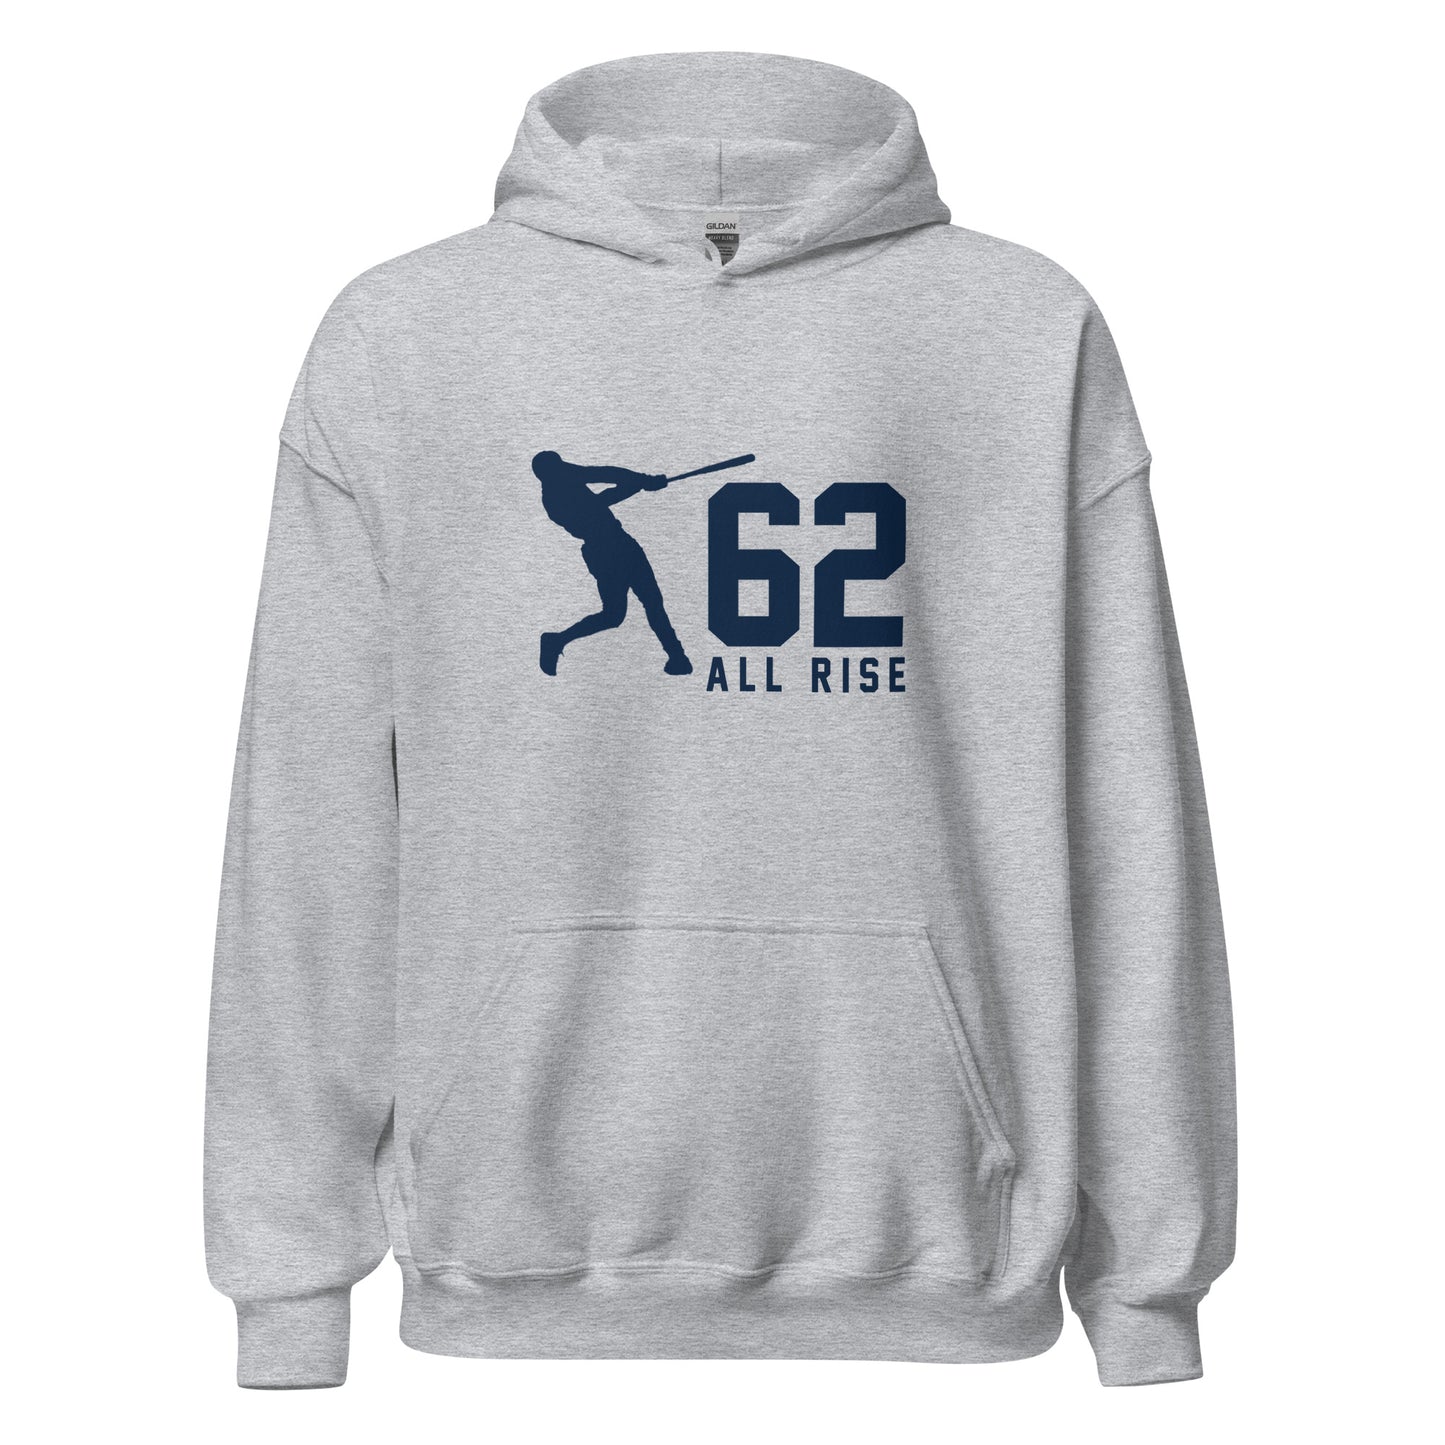 62 All Rise Light Color Unisex Hoodie